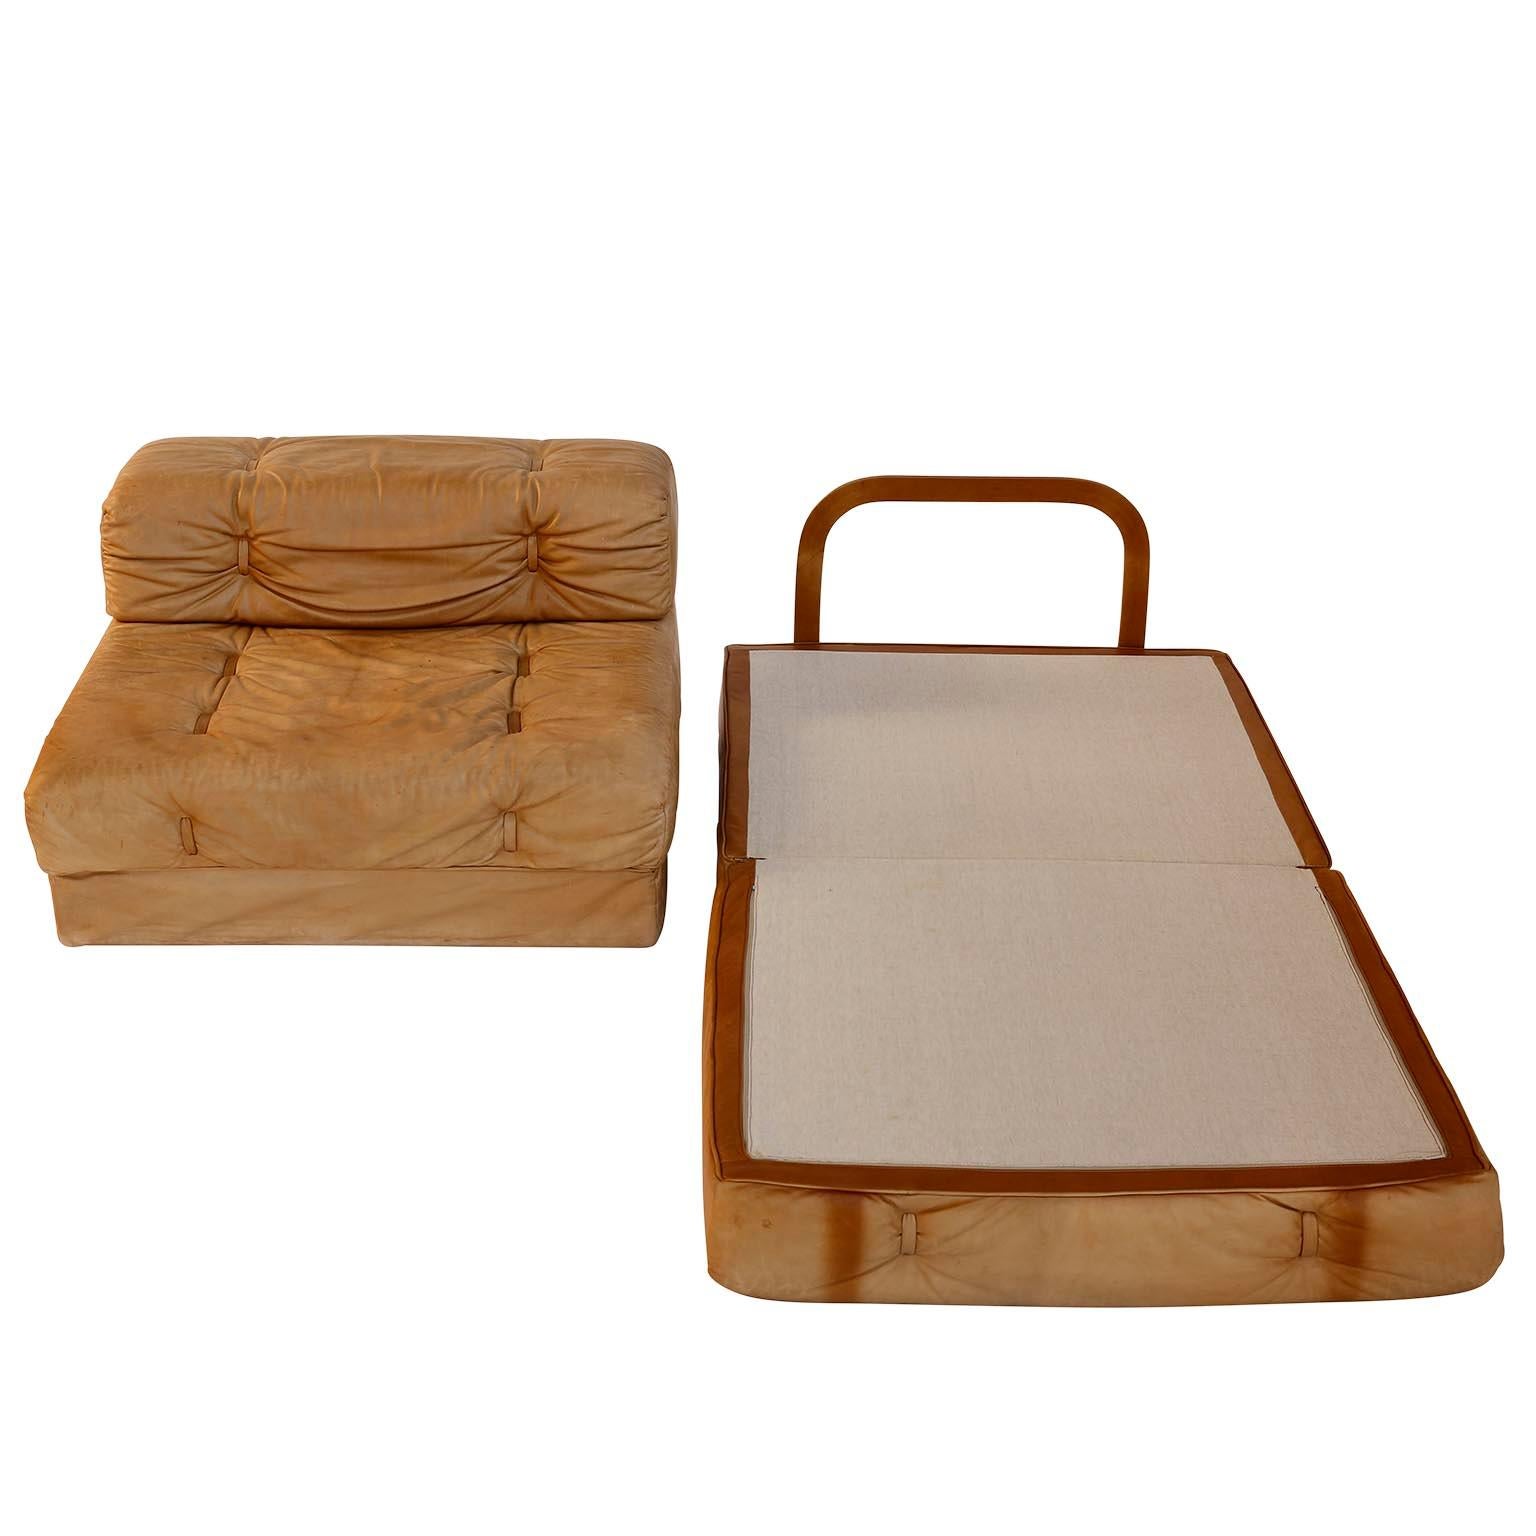 A pair of vintage chairs in aged and patinated leather designed by Karl Wittmann and manufactured by Wittmann Möbelwerkstätten, Austria, in midcentury in 1970s.
They are unfoldable and convertible and into a daybed or spare bed.
The back is made